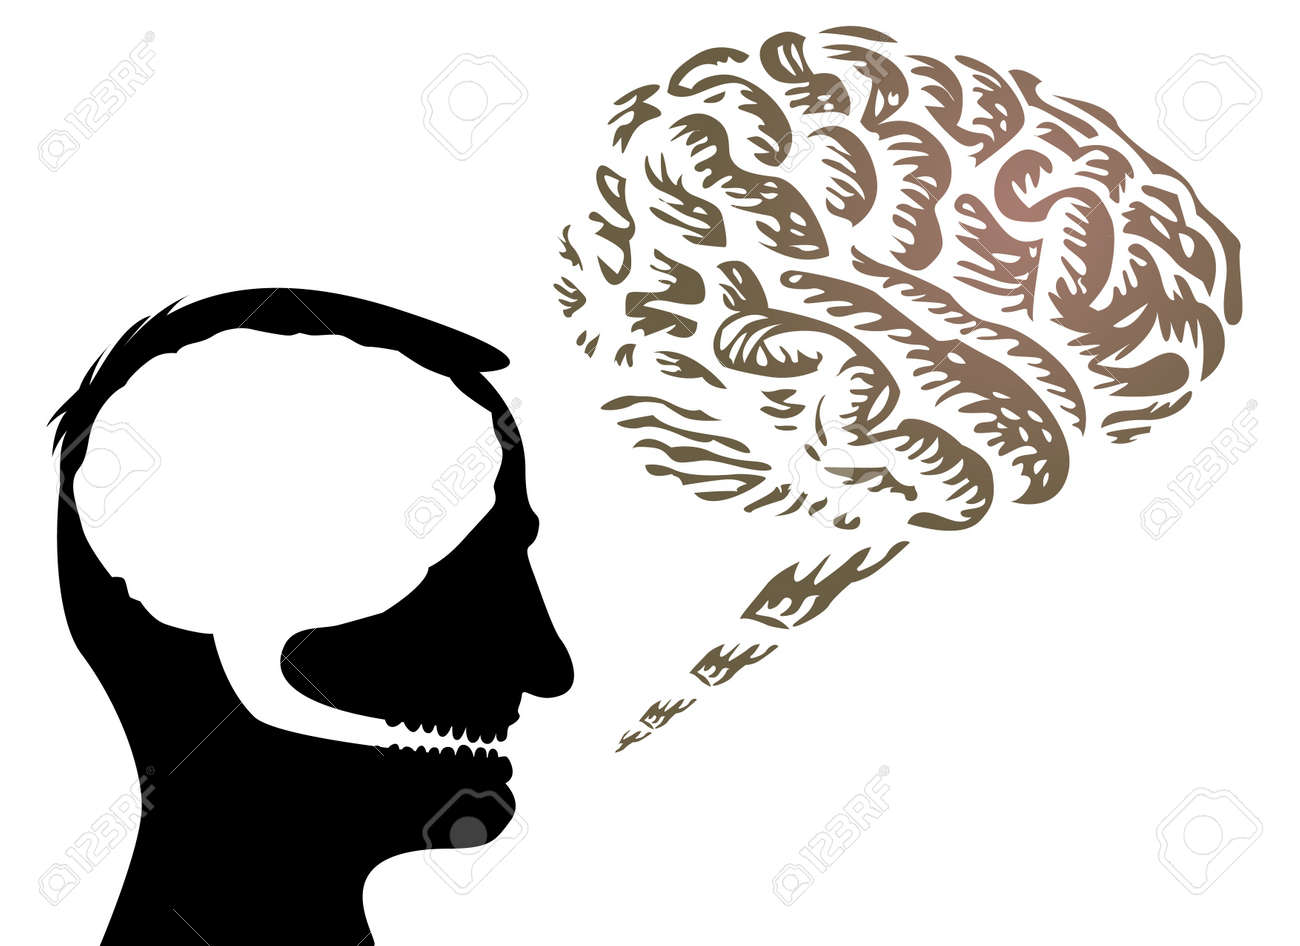 14698698-human-head-with-brain-outside-isolated-illustration.jpg